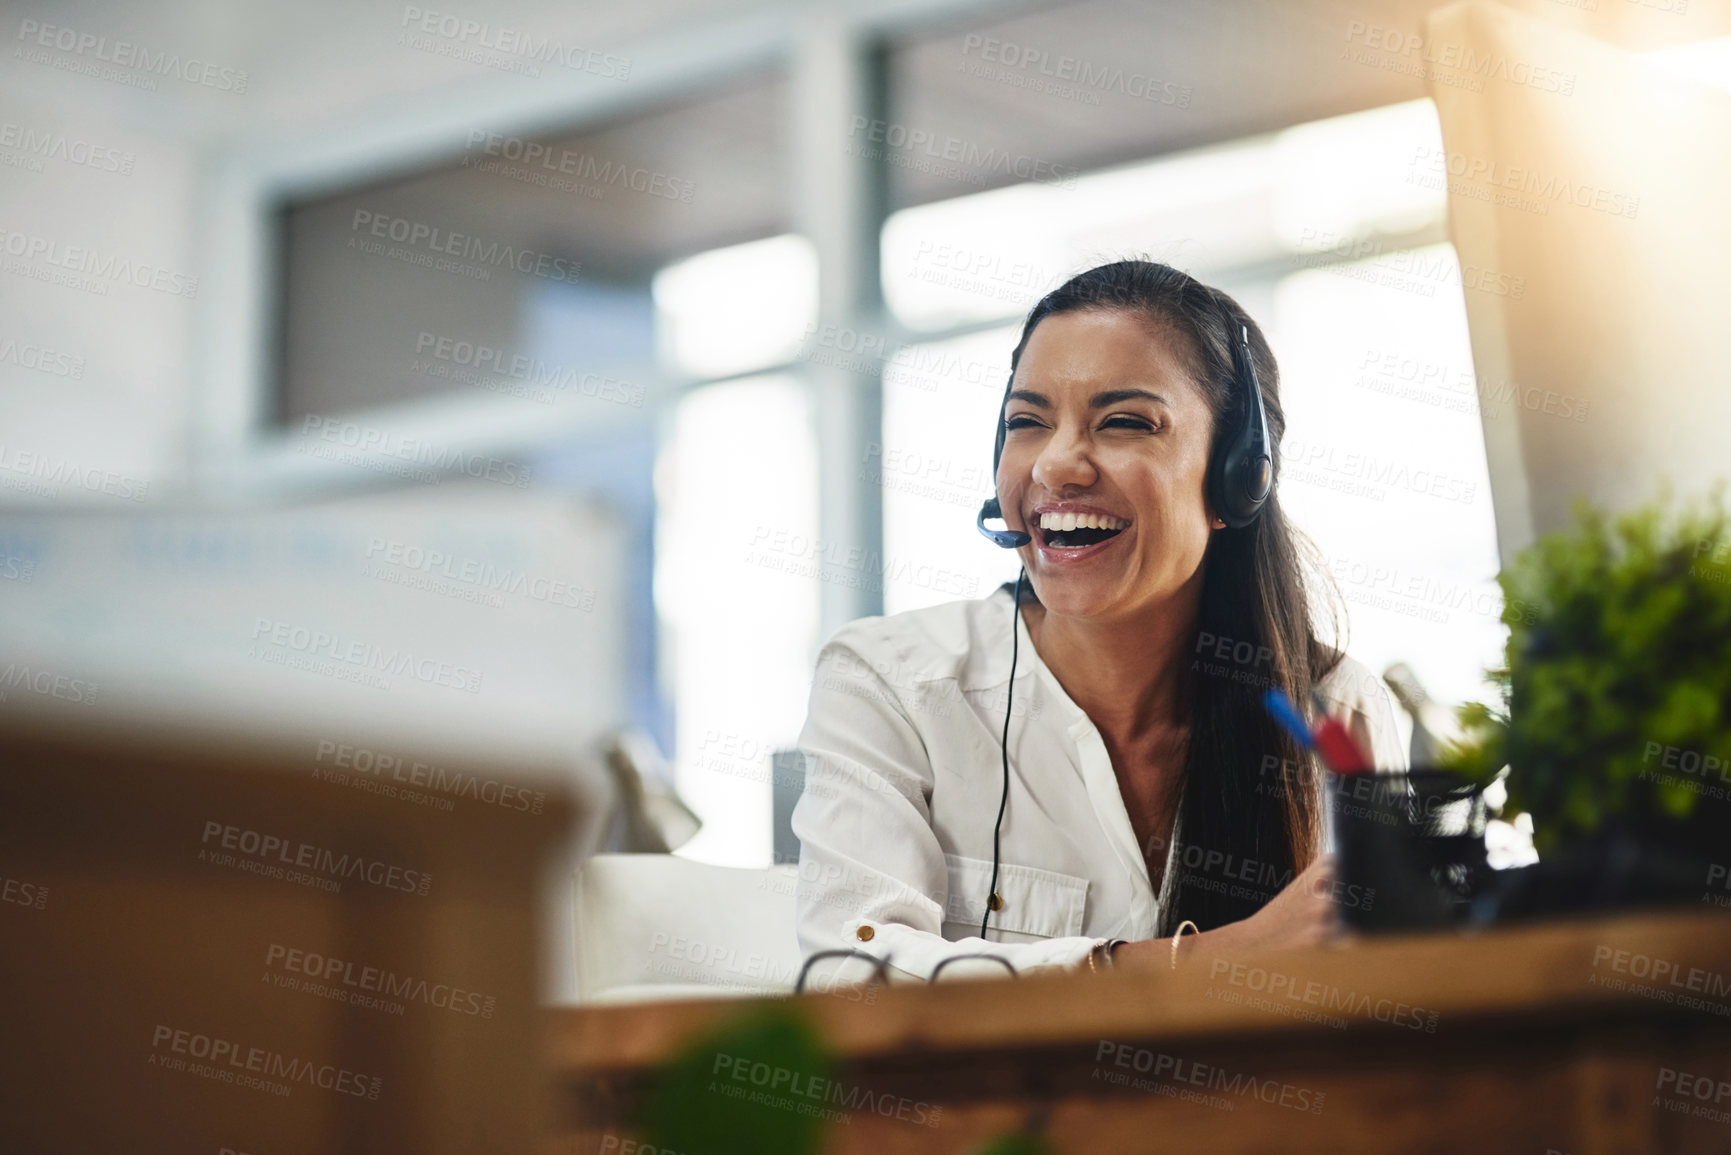 Buy stock photo Funny, virtual assistant or happy woman in call center consulting, speaking or talking at help desk. Smile, friendly or sales consultant laughing in telemarketing customer services or telecom company